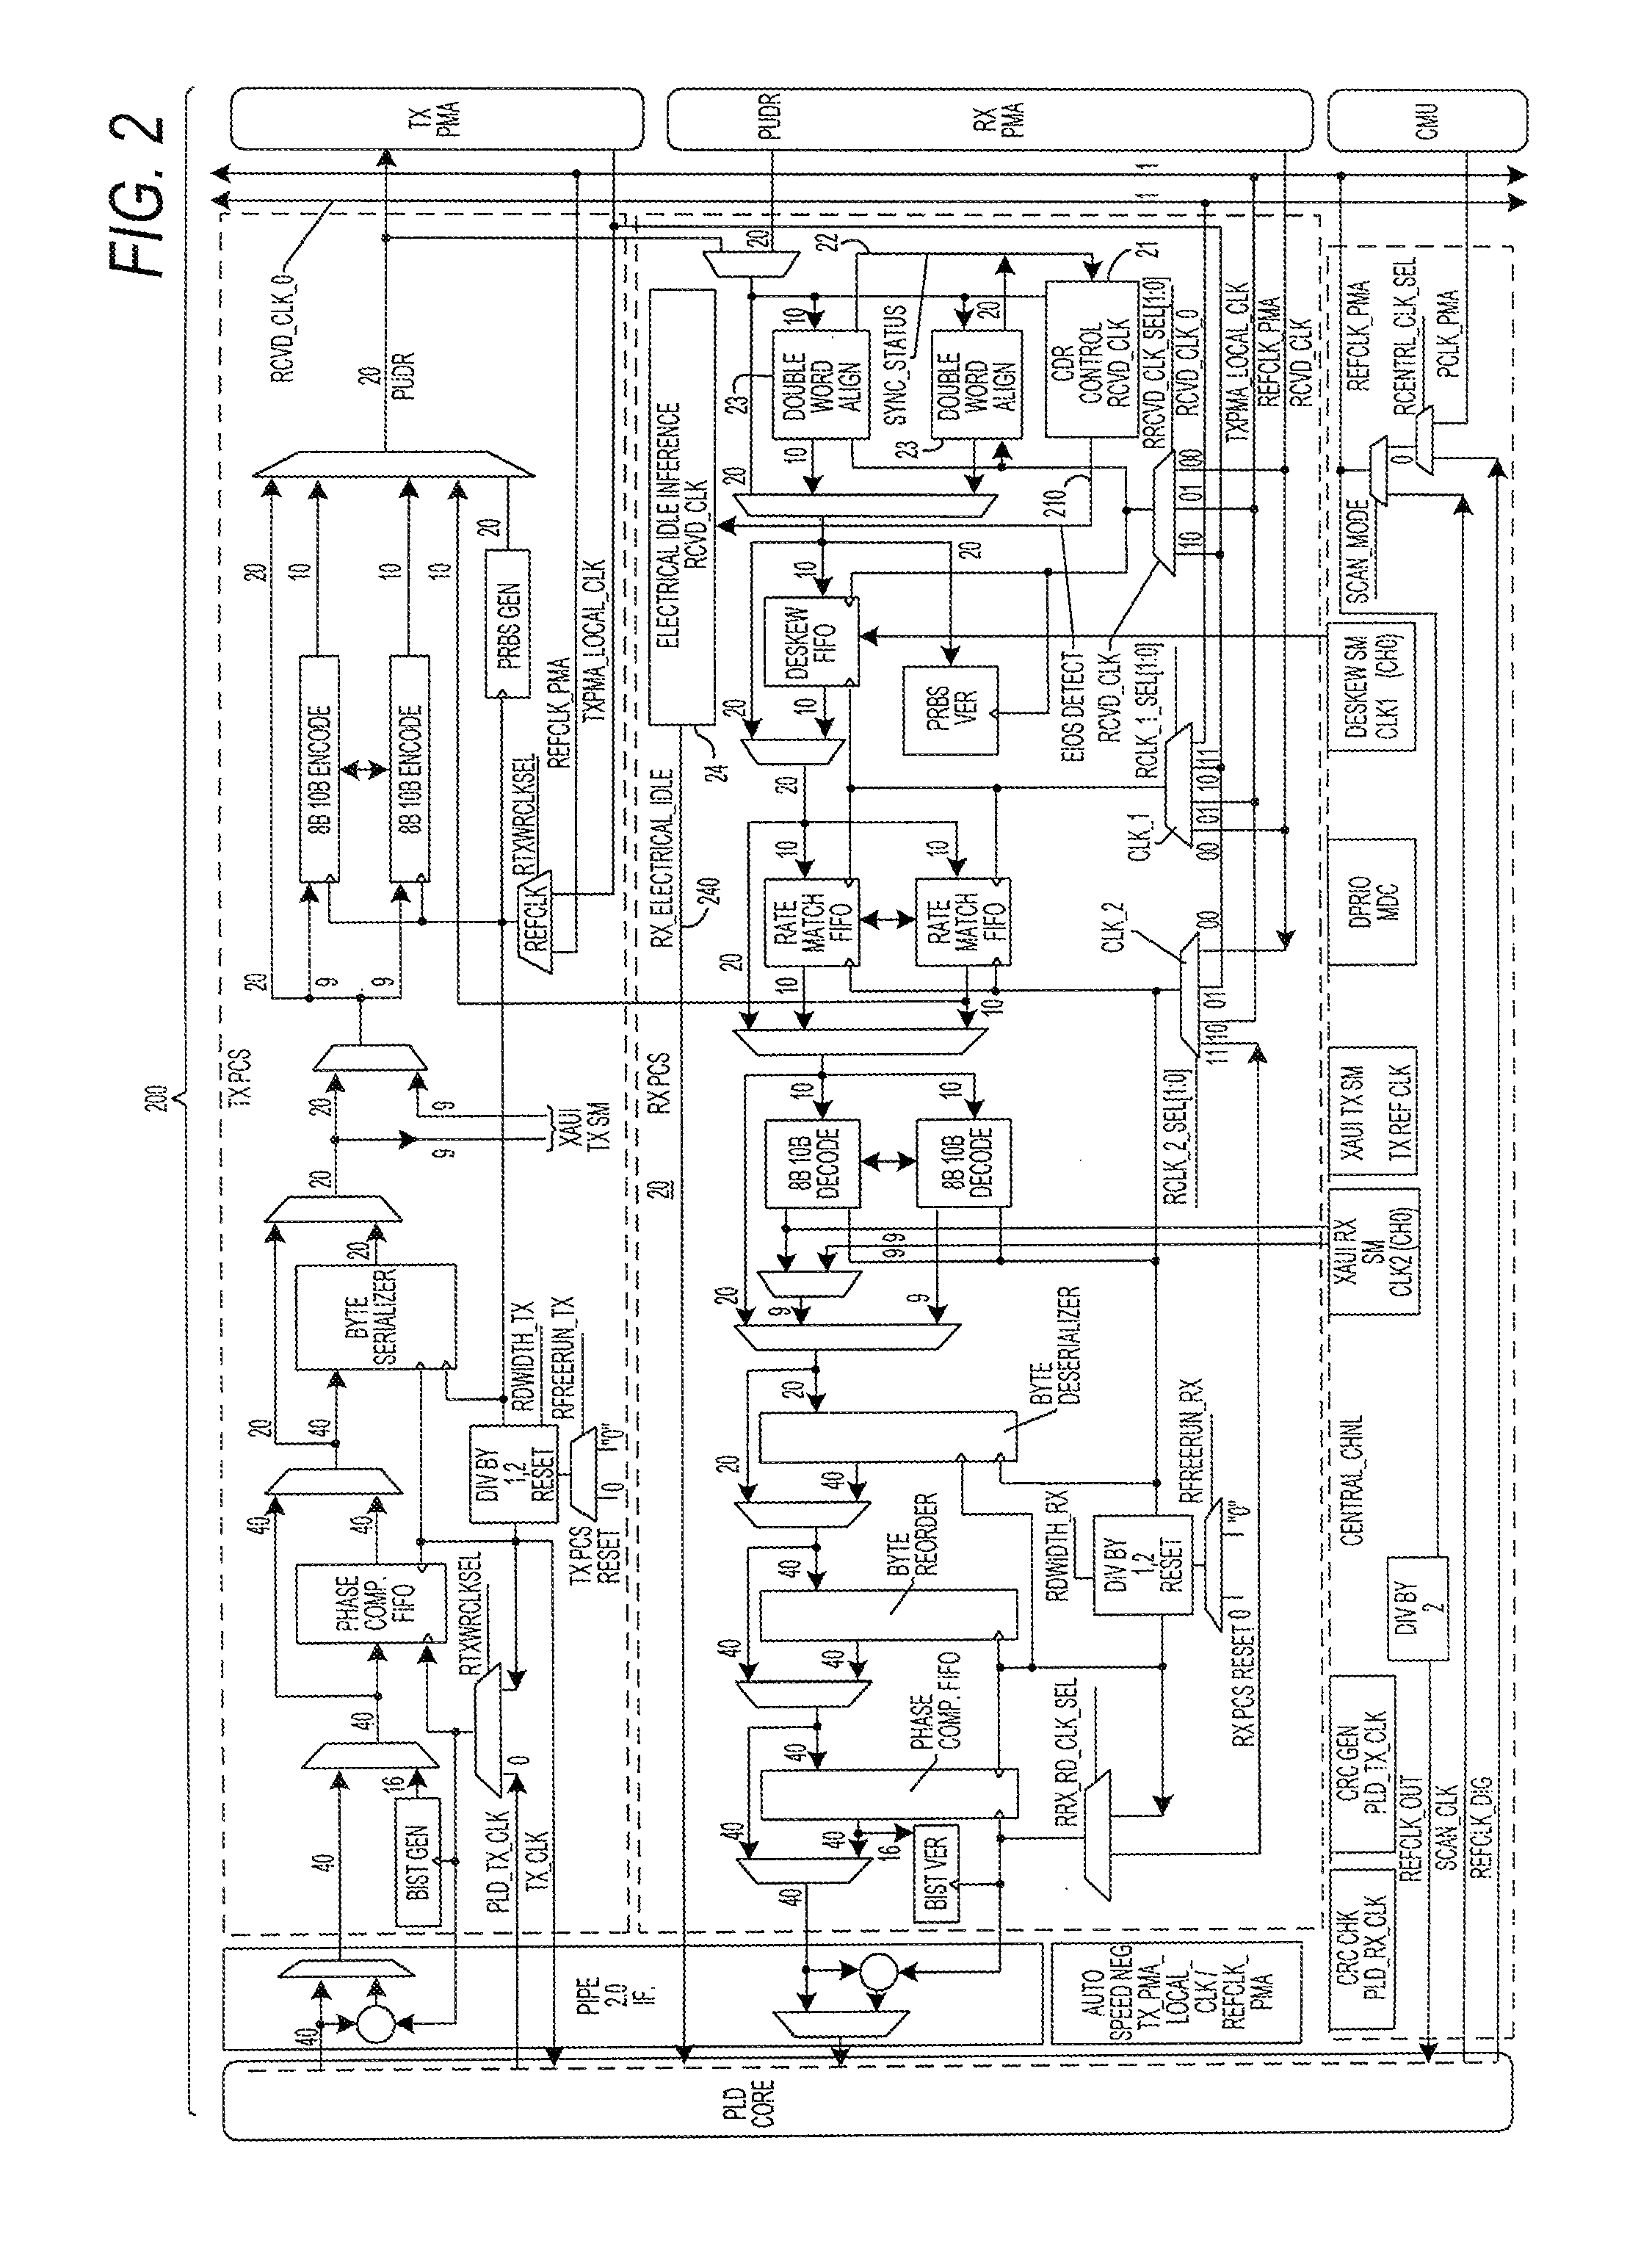 CDR control architecture for robust low-latency exit from the power-saving mode of an embedded CDR in a programmable integrated circuit device